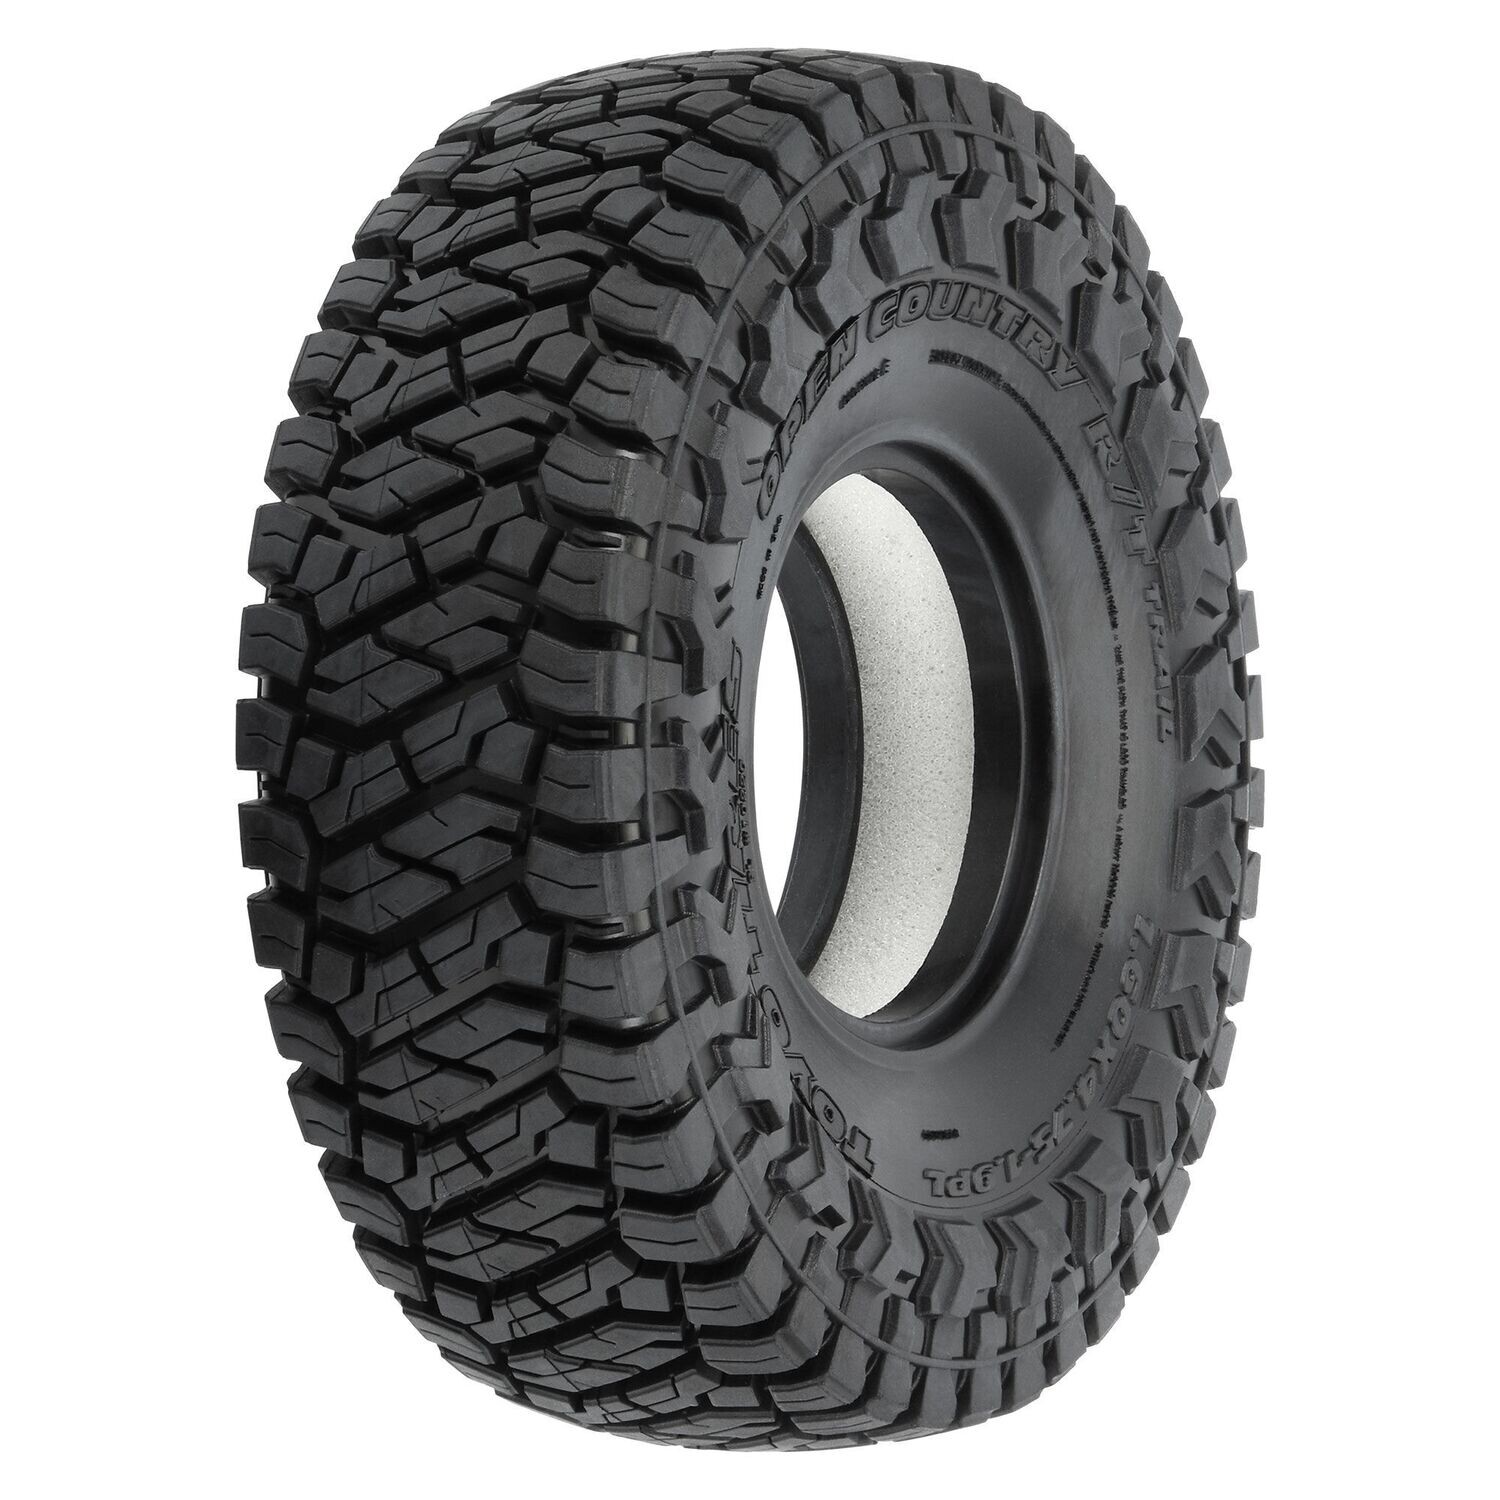 PRO1022614 Toyo Open Country R/T Trail 1.9"" G8 Rock Terrain Truck Tires (2) for Front or Rear